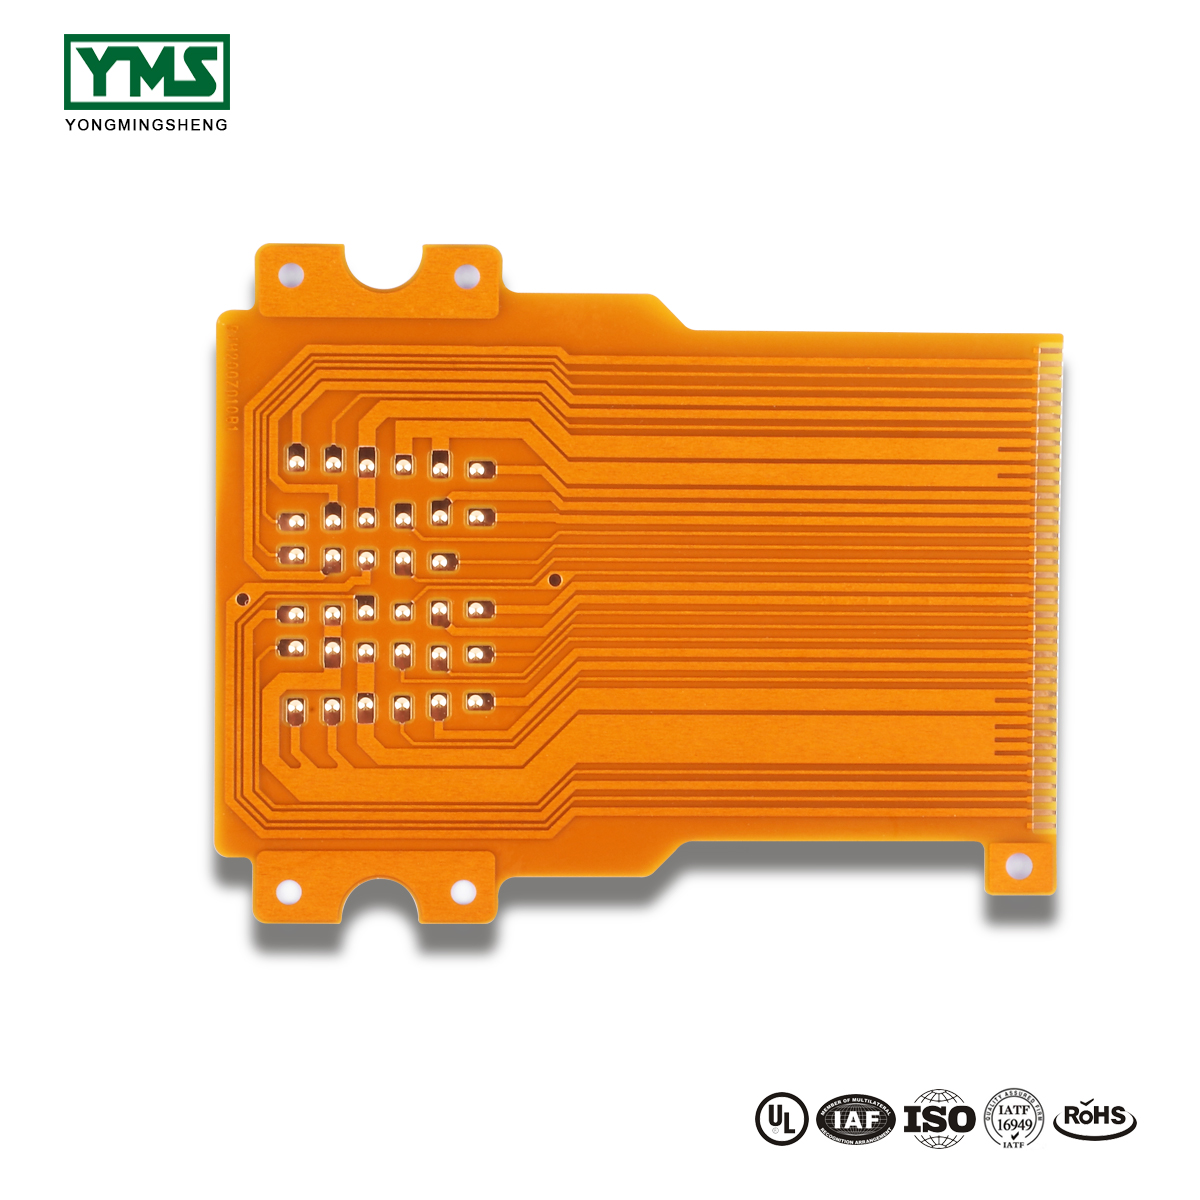 Competitive Price for Thermoelectric Separation Car Copper Base Pcb - 1Layer Raised Point flexible Board | YMSPCB – Yongmingsheng